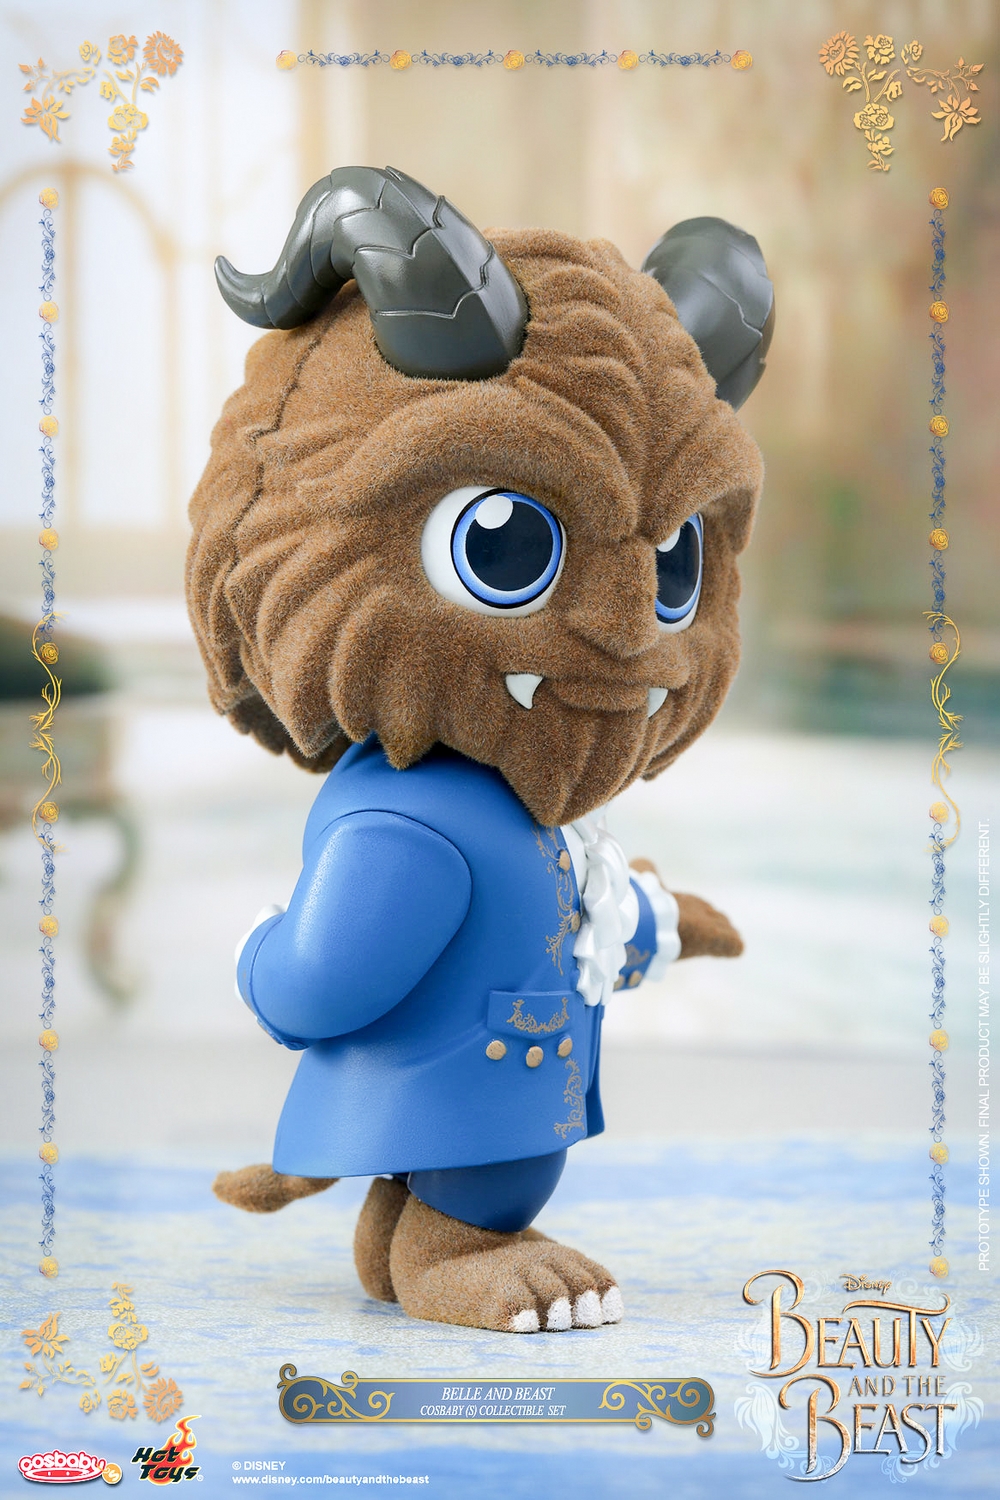 Hot-Toys-COSB352-353-Beauty-and-the-Beast-Cosbaby-011.jpg